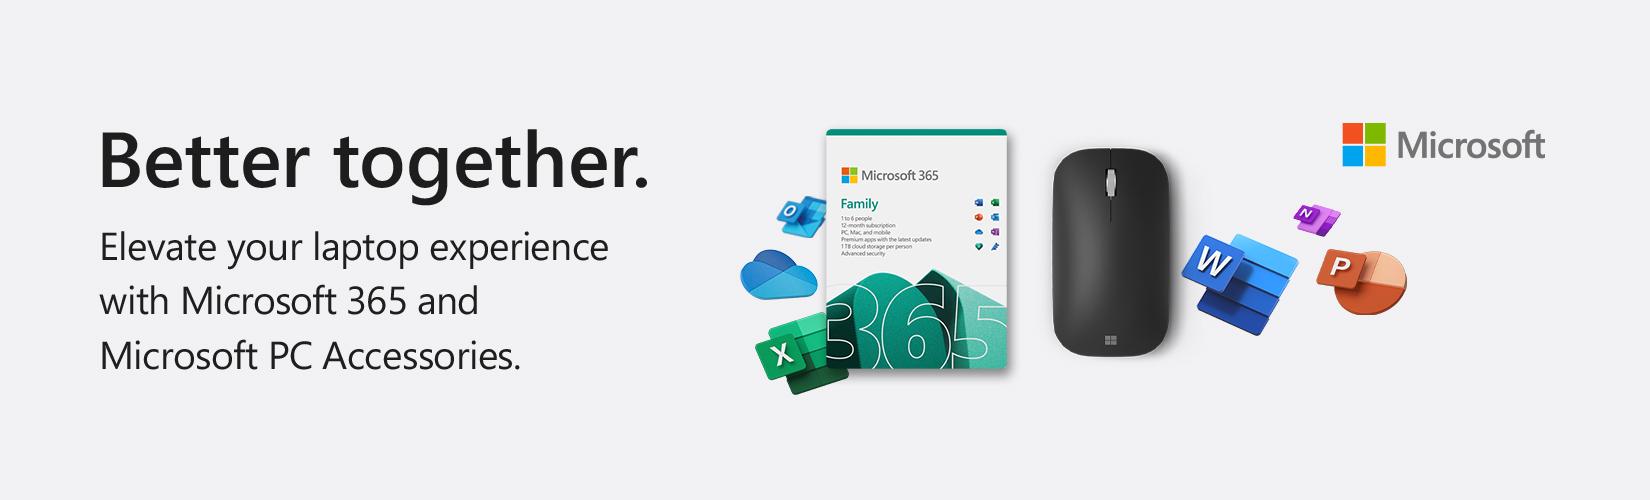 Microsoft. Better together. Elevate your laptop experience with Microsoft 365 and Microsoft PC accessories.